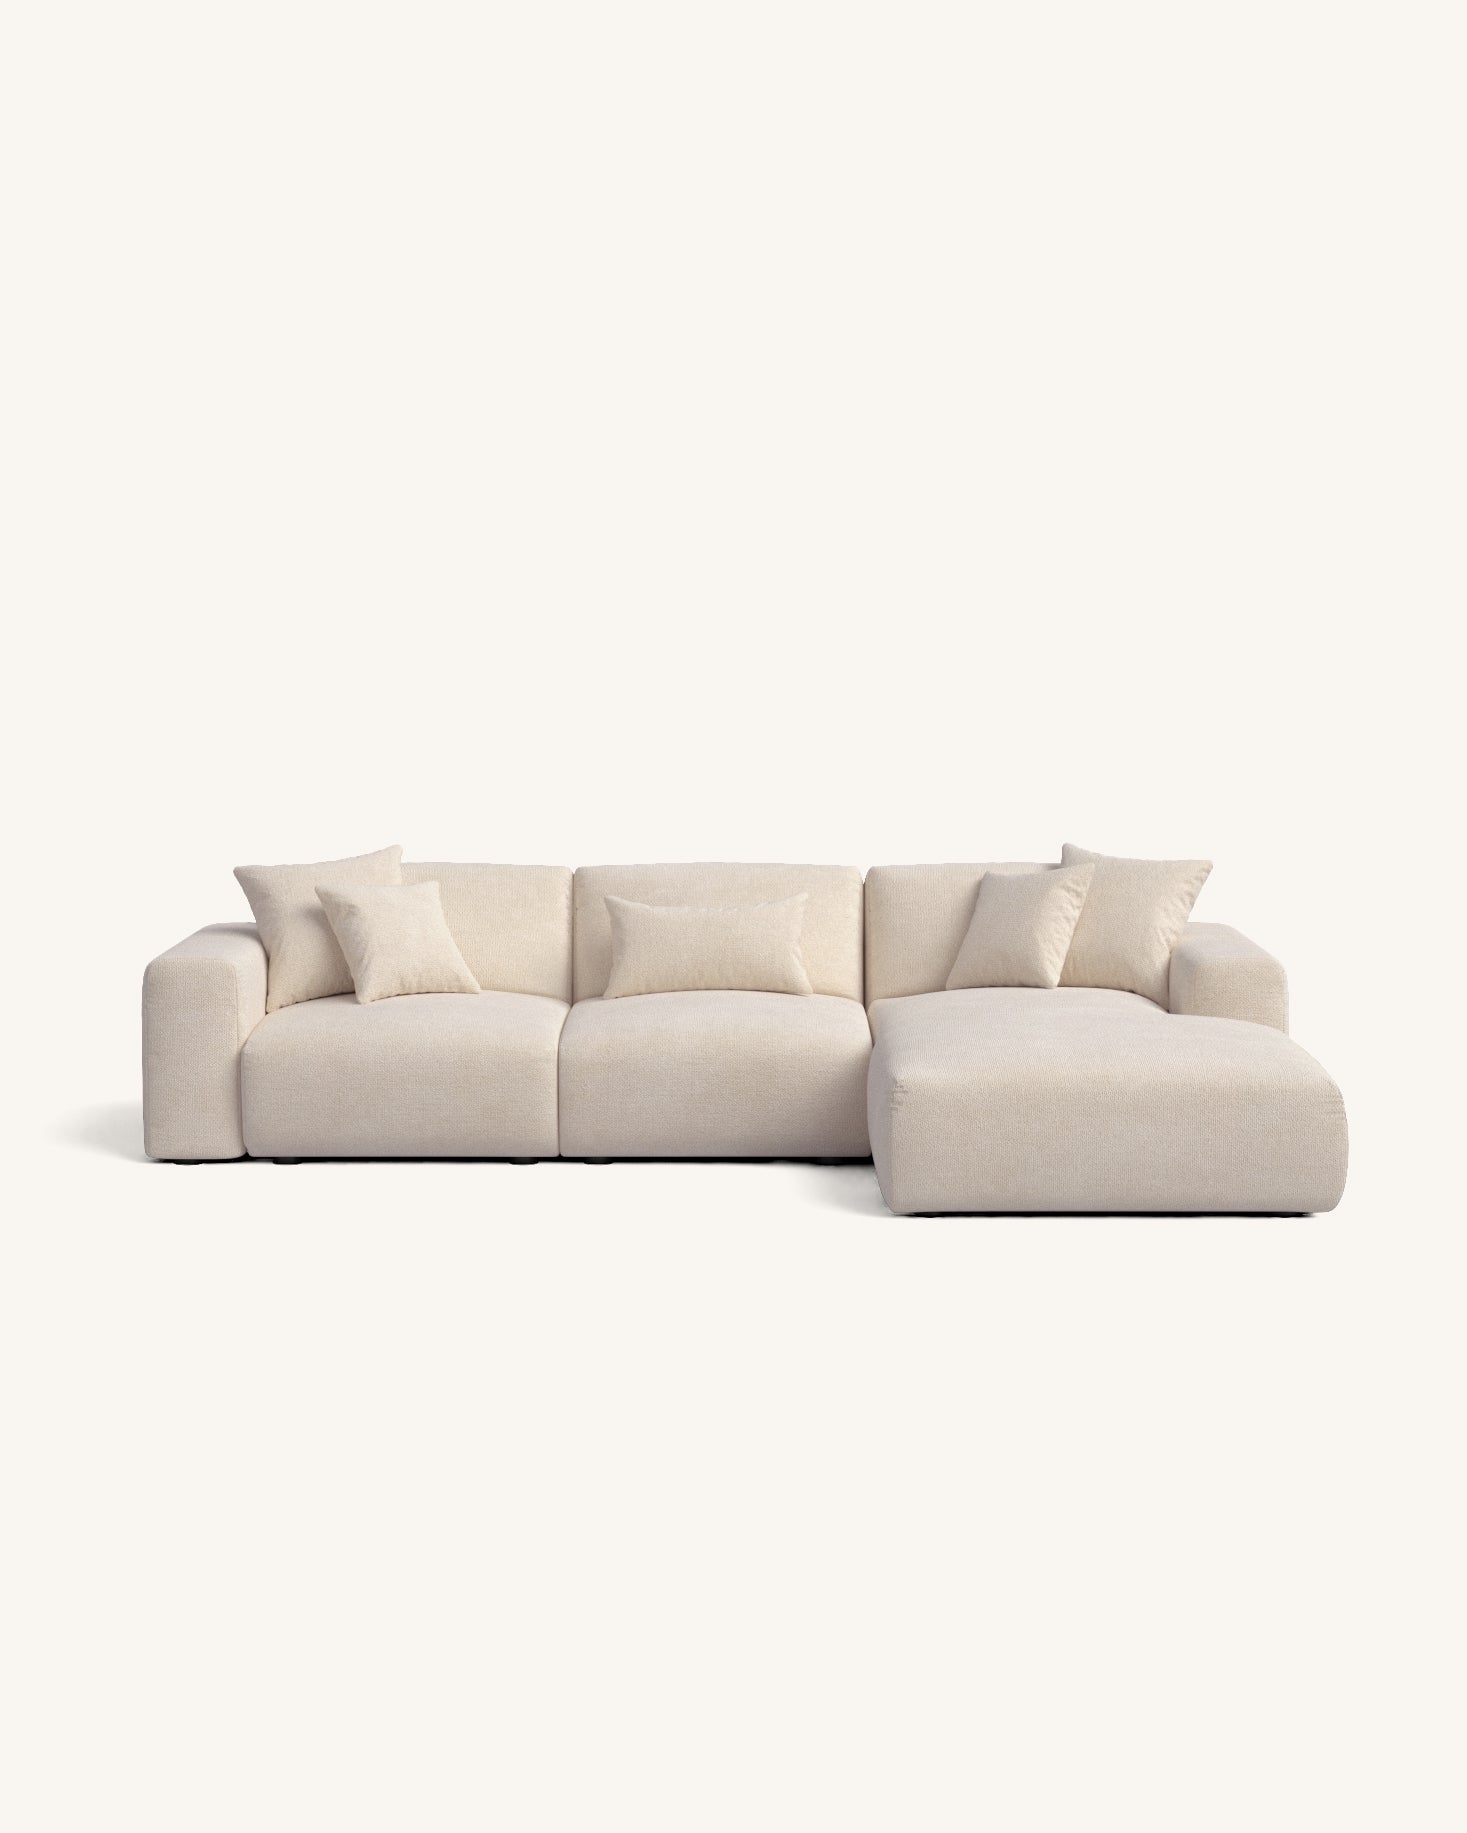 Family product Sofa und Chaise Longue Enzo